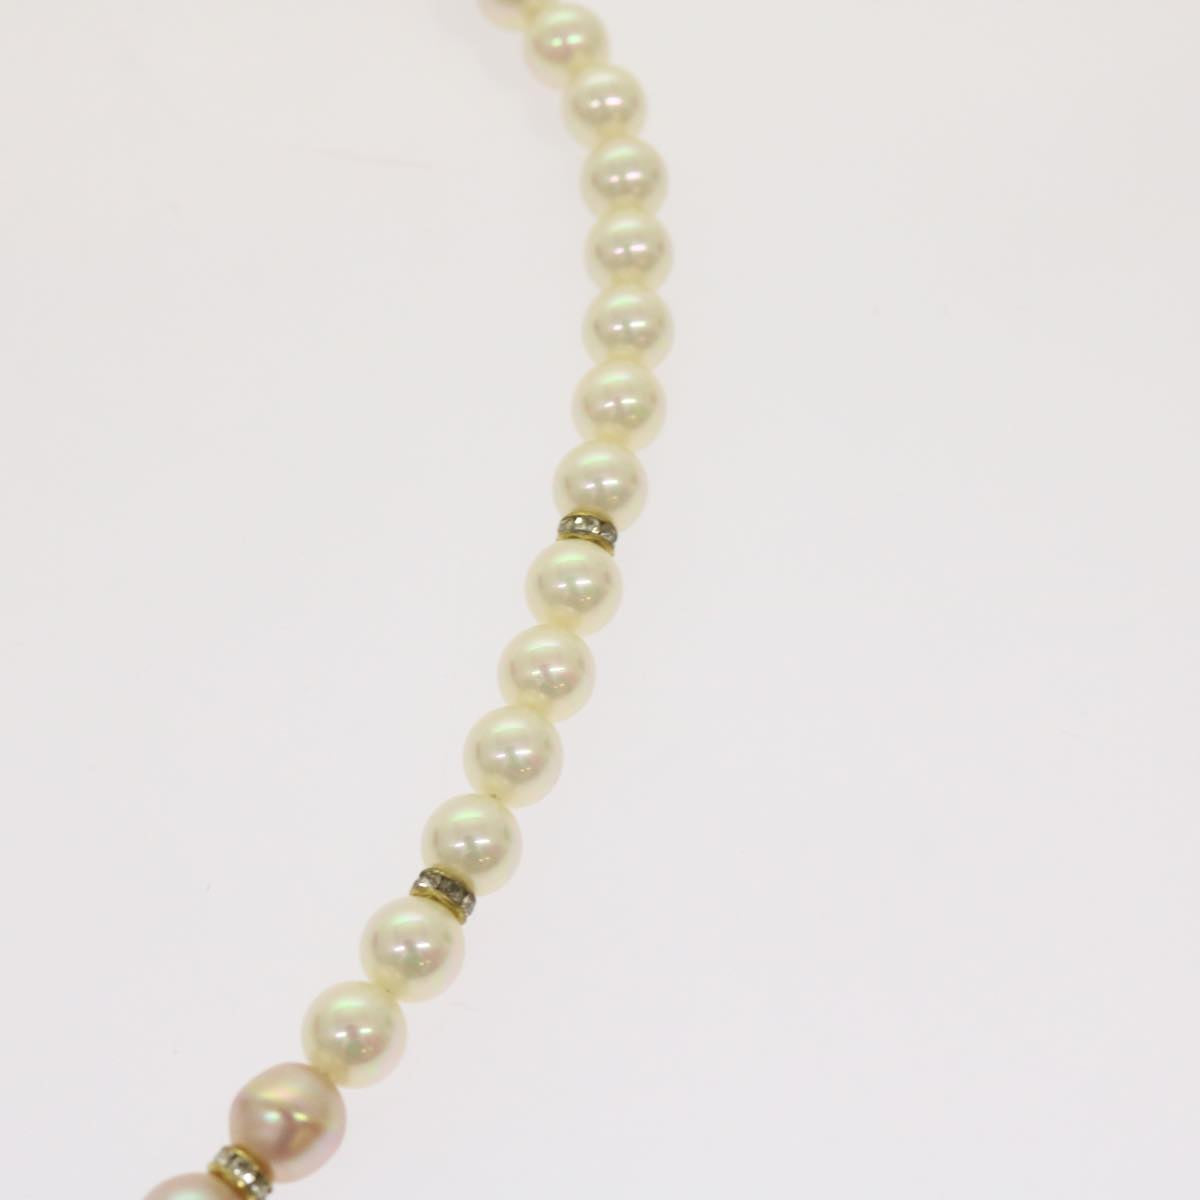 Christian Dior Pearl Necklace Multicolor Auth am5957